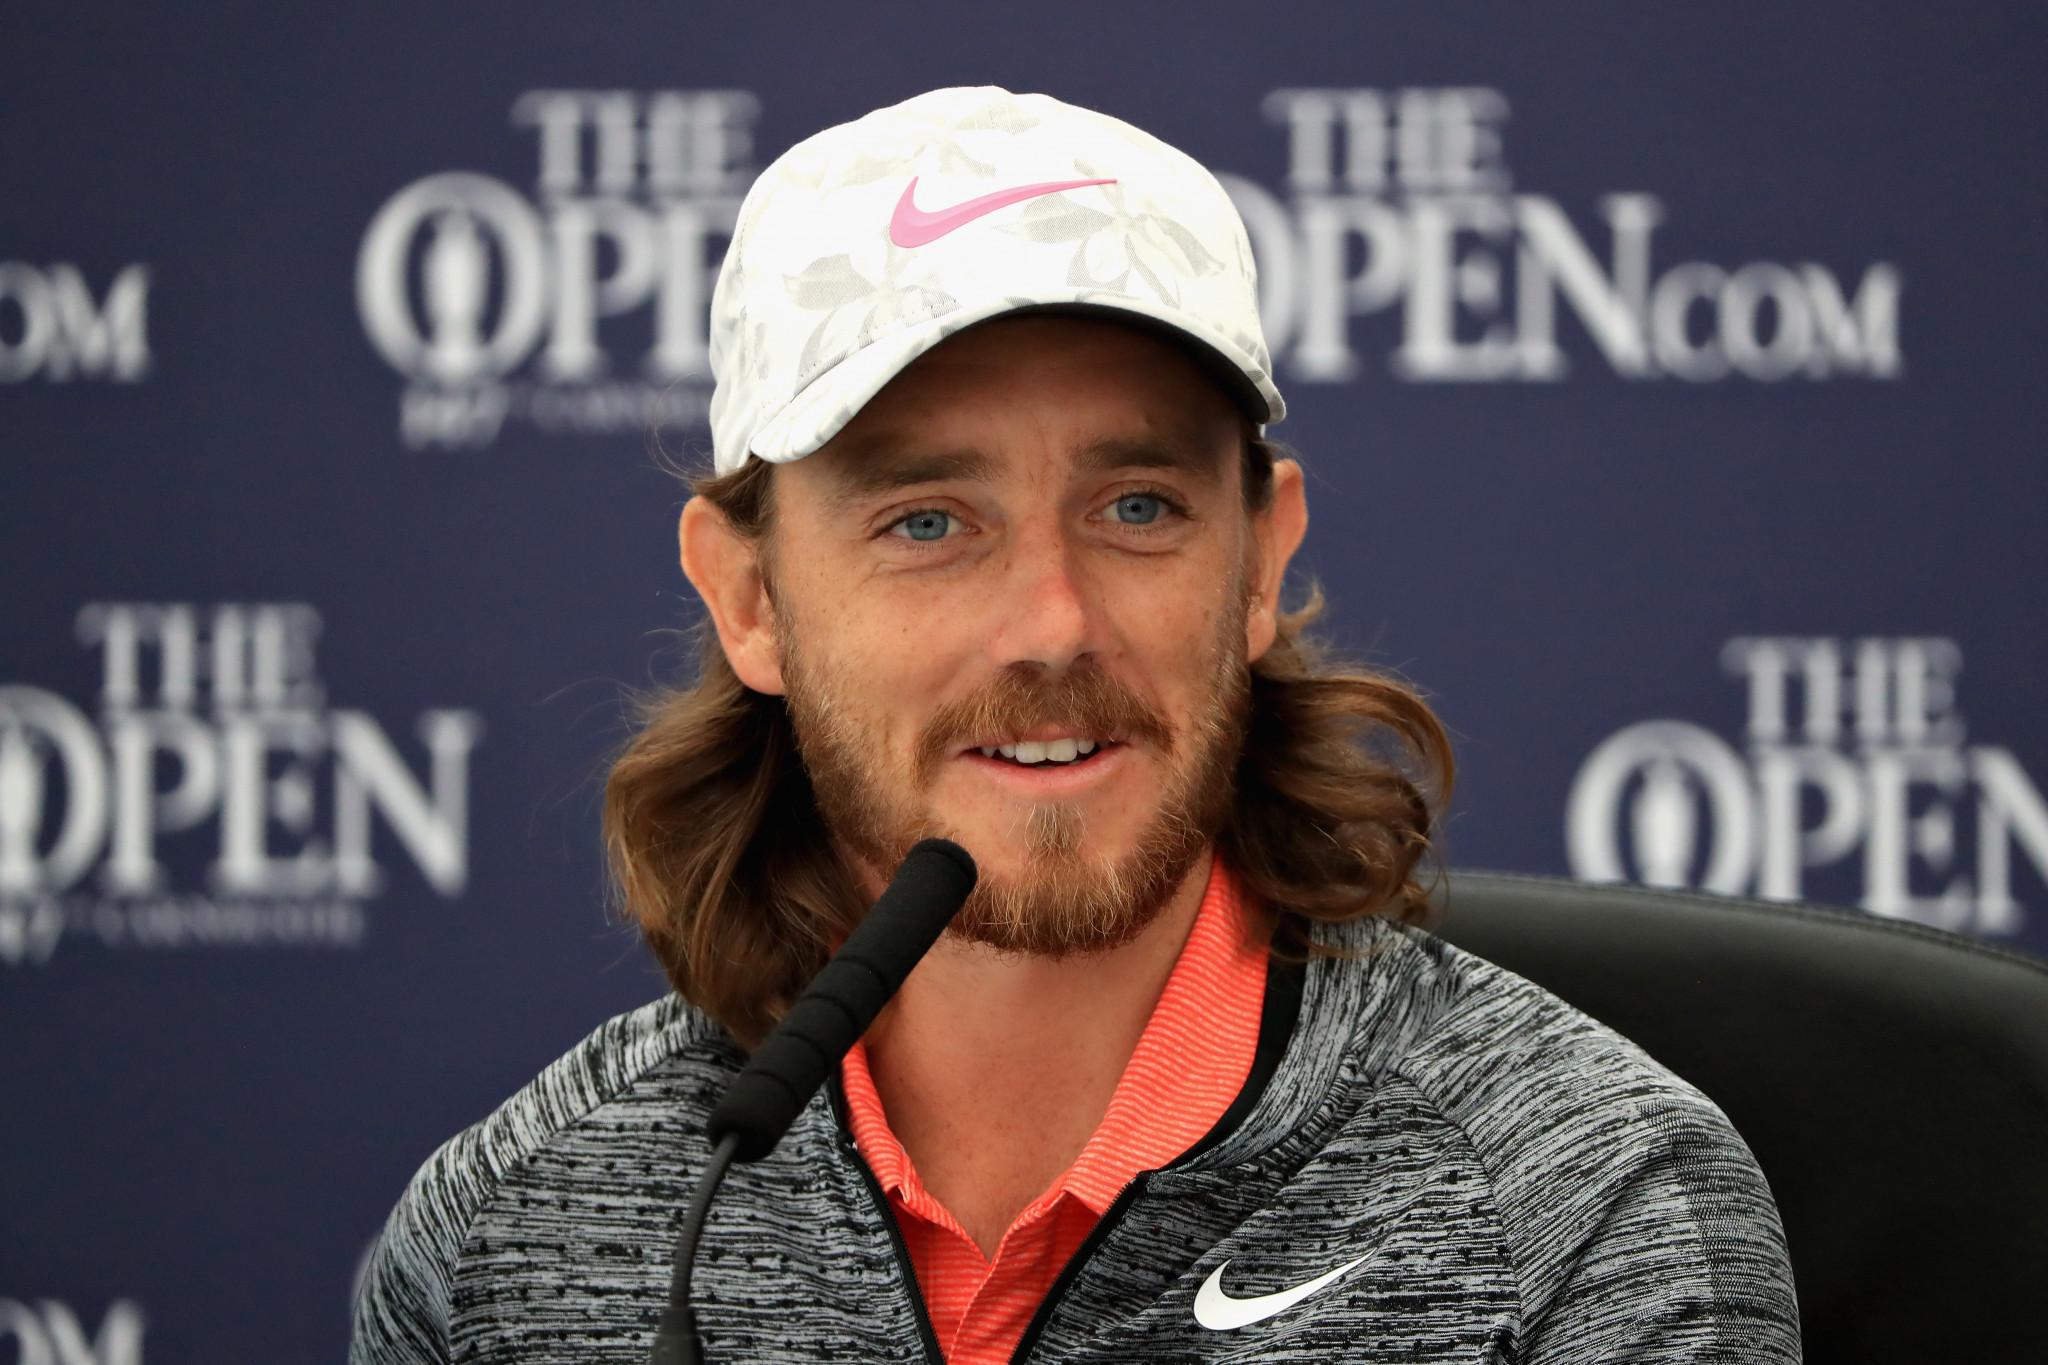 Britain's tommy Fleetwood hopes to break American dominance of the majors at the 147th Open Championship ©Getty Images